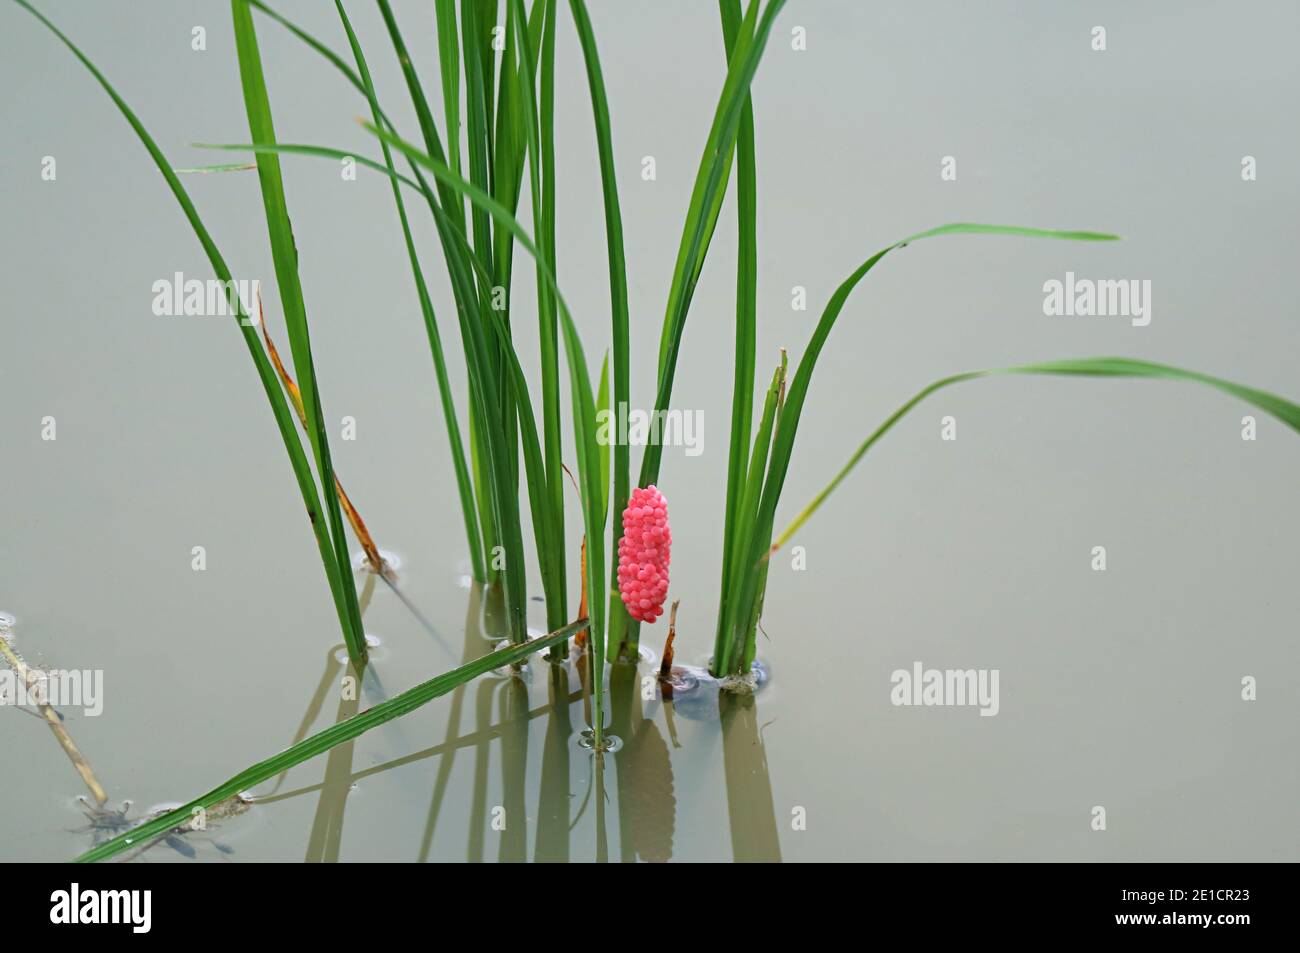 Vibrant Pink Eggs of Golden Apple Snail or Pomacea canaliculata Laid on Growing Rice Plants Stock Photo